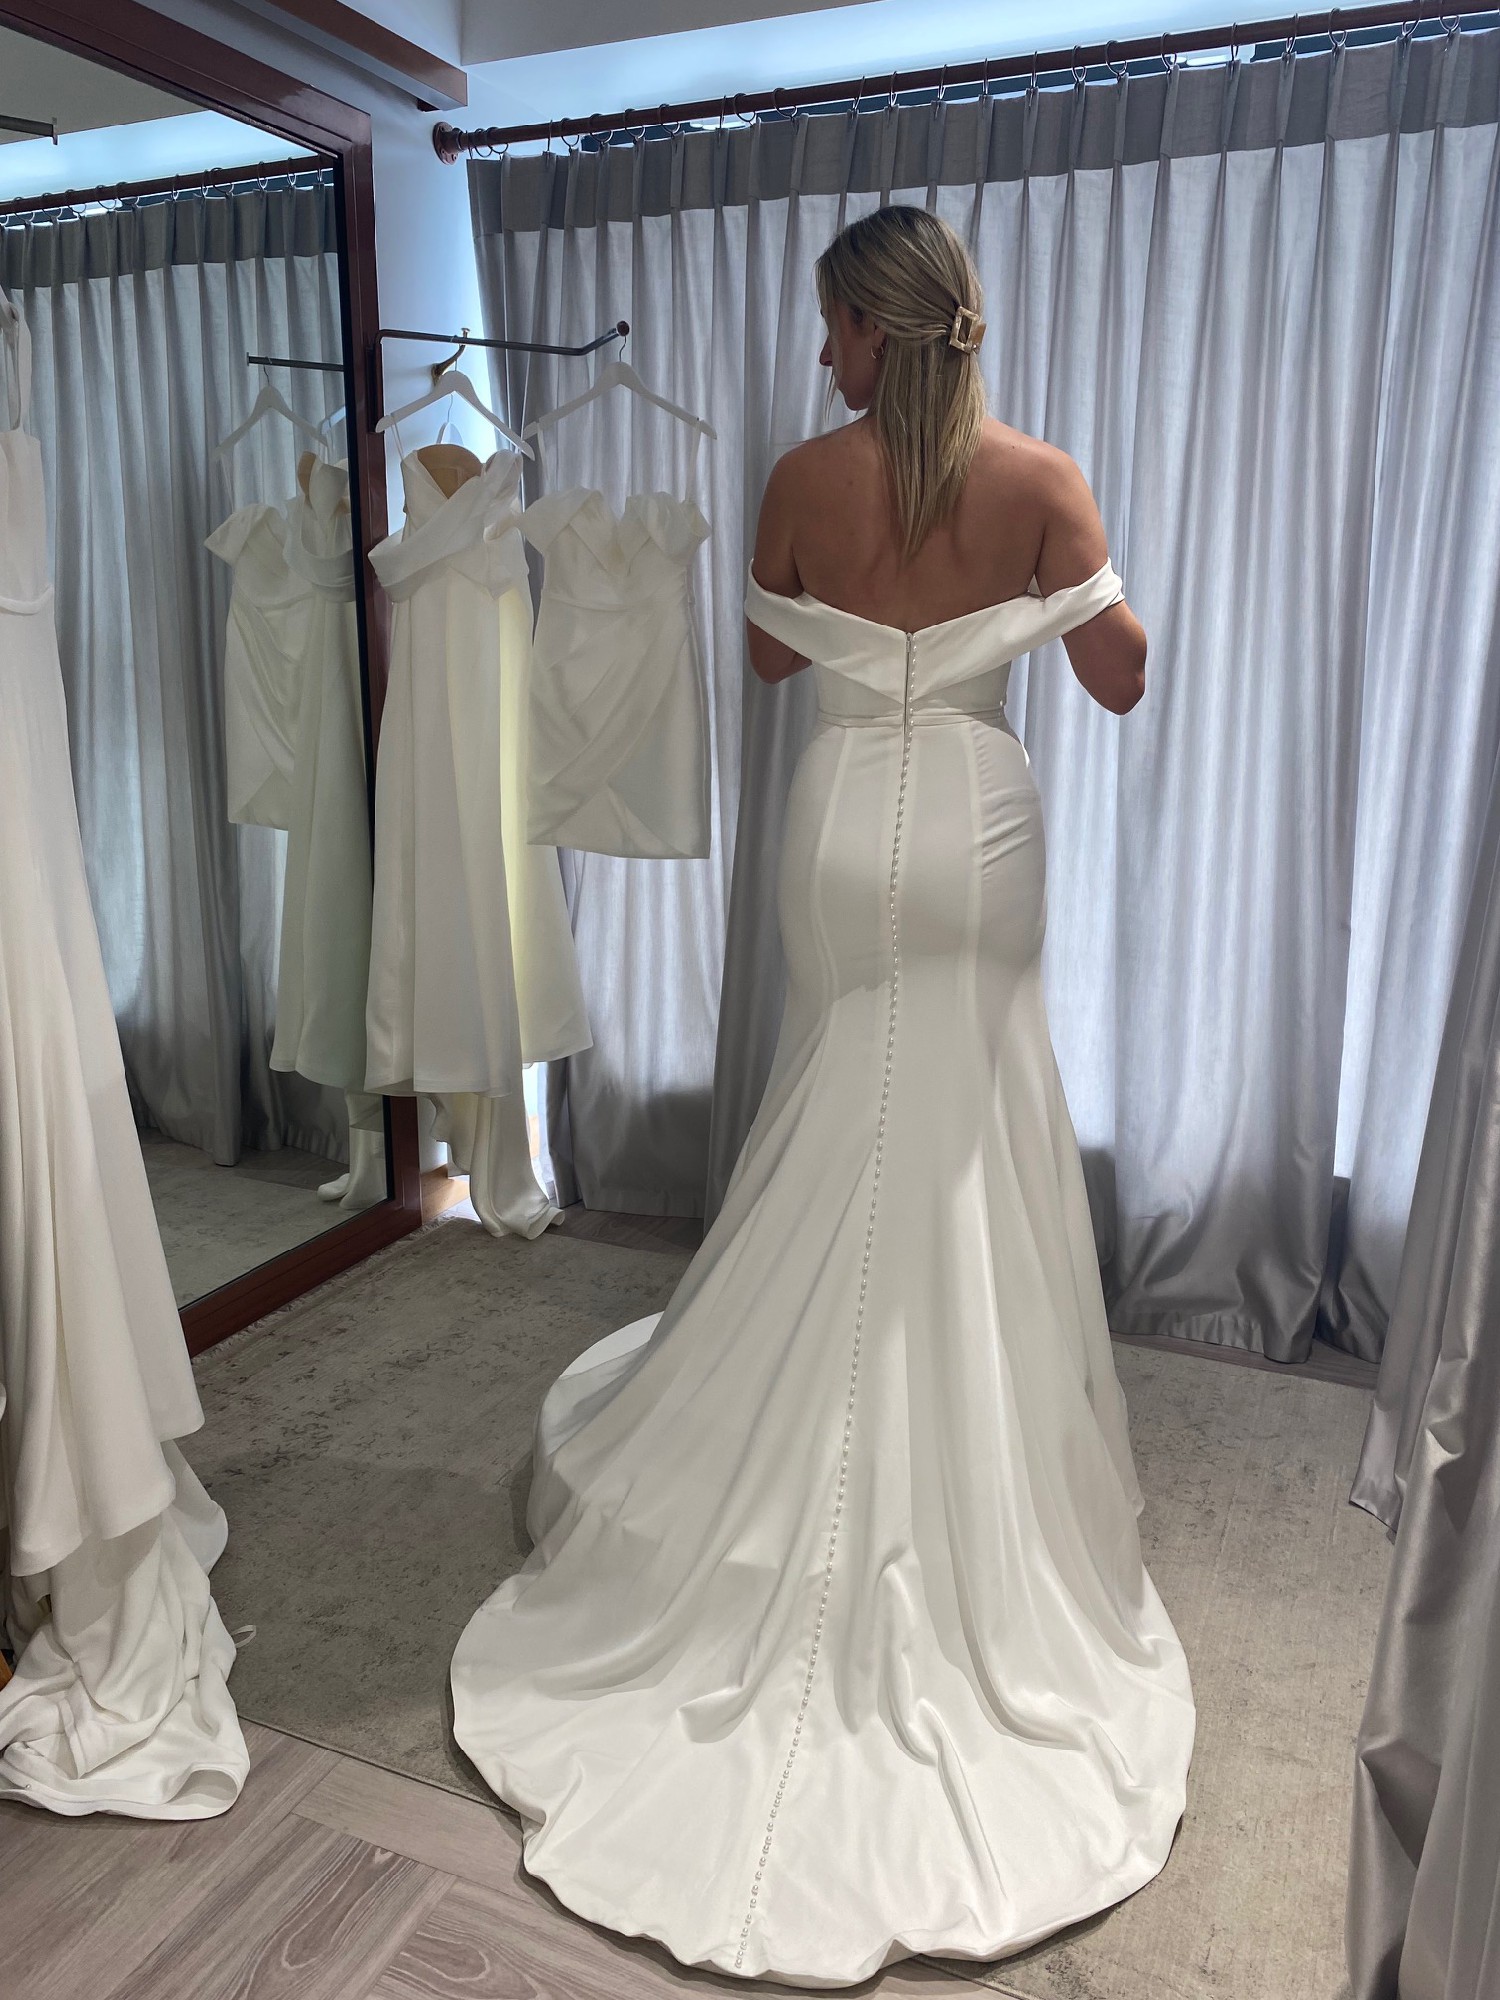 I'm looking for a dupe of Le Chic by Hera Couture : r/weddingdress